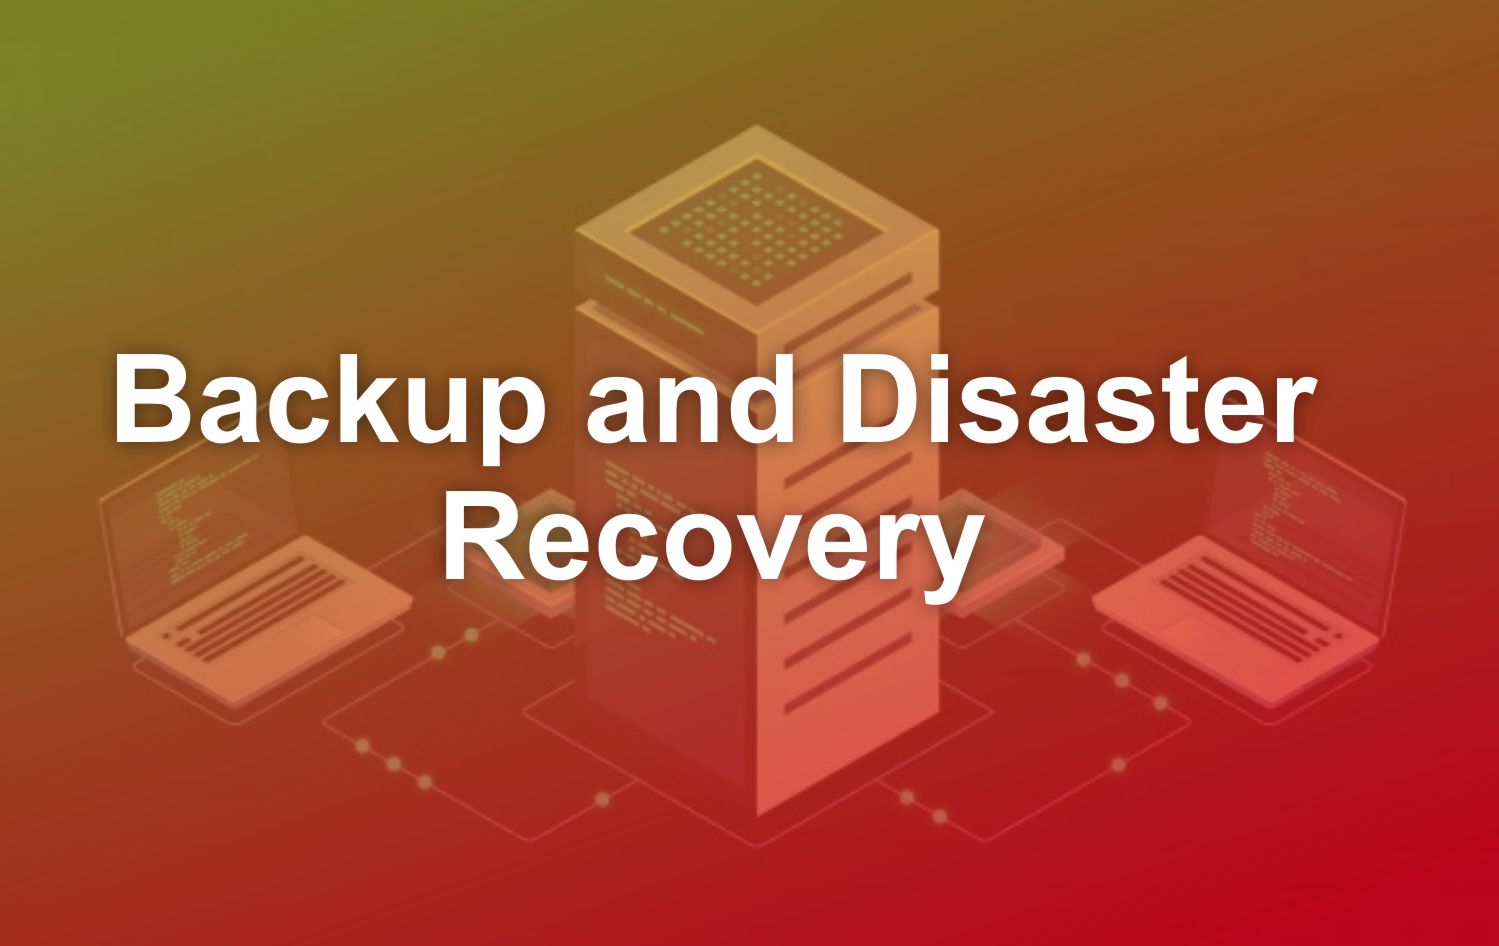 Backup and disaster recovery